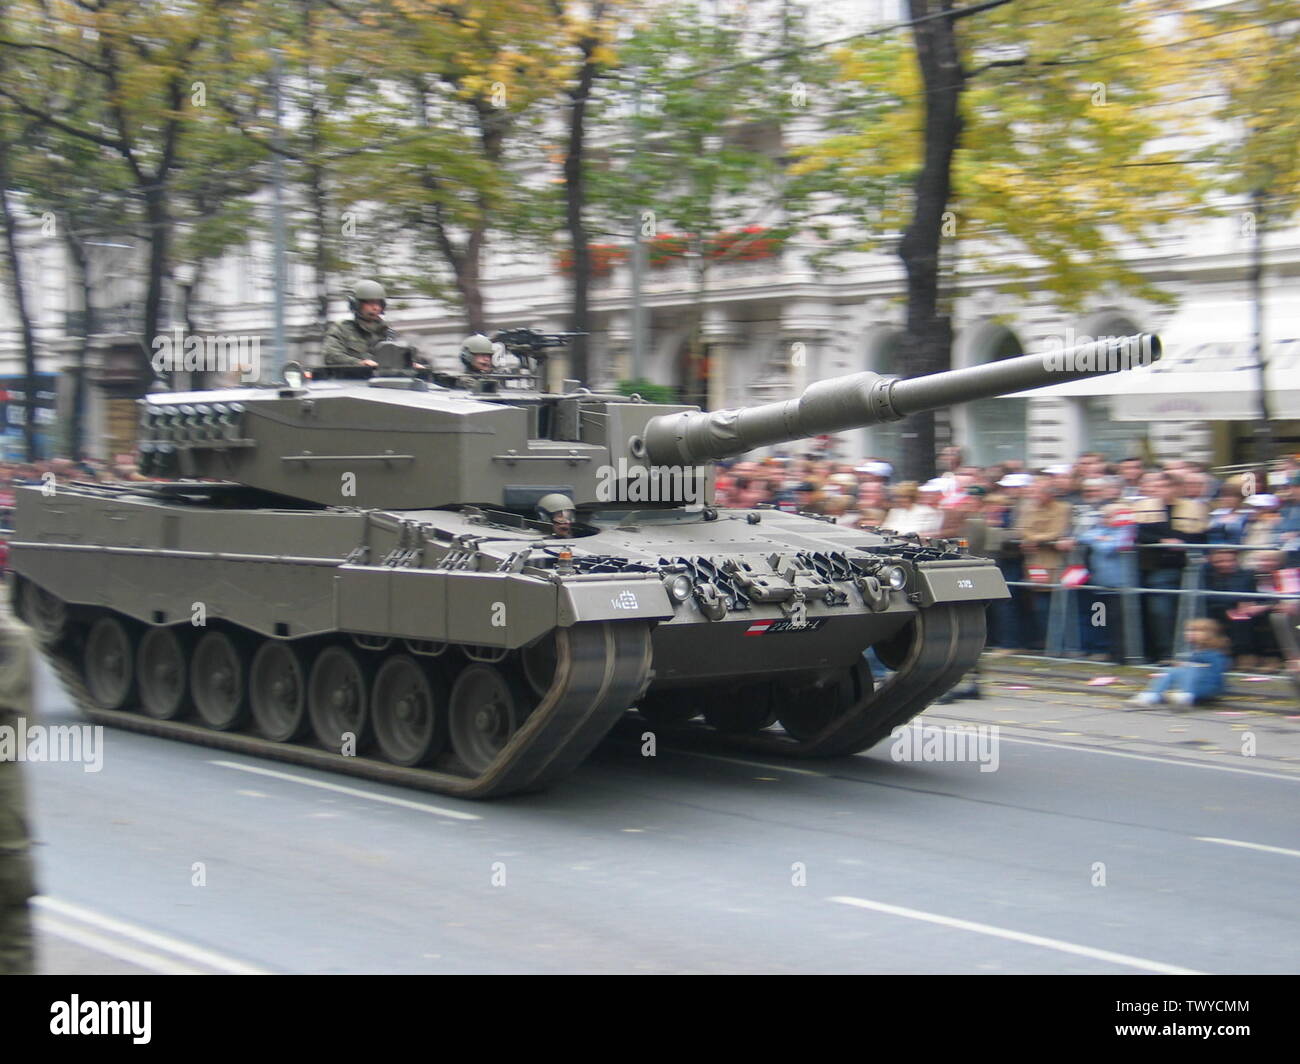 A Leopard 2 A4 of the Austrian Armed Forces (Bundesheer) on Austria's National Day in 2005 Ein Leopard 2 A4 des Bundesheeres am Nationalfeiertag 2005; Taken onÂ 26 October 2005 uploaded to de.pedia on 2009-08-24; own work by Pappenheim from de.pedia http://de.pedia//Datei:Leopard2beiParade2005.jpg (german pedia); Pappenheim; Stock Photo